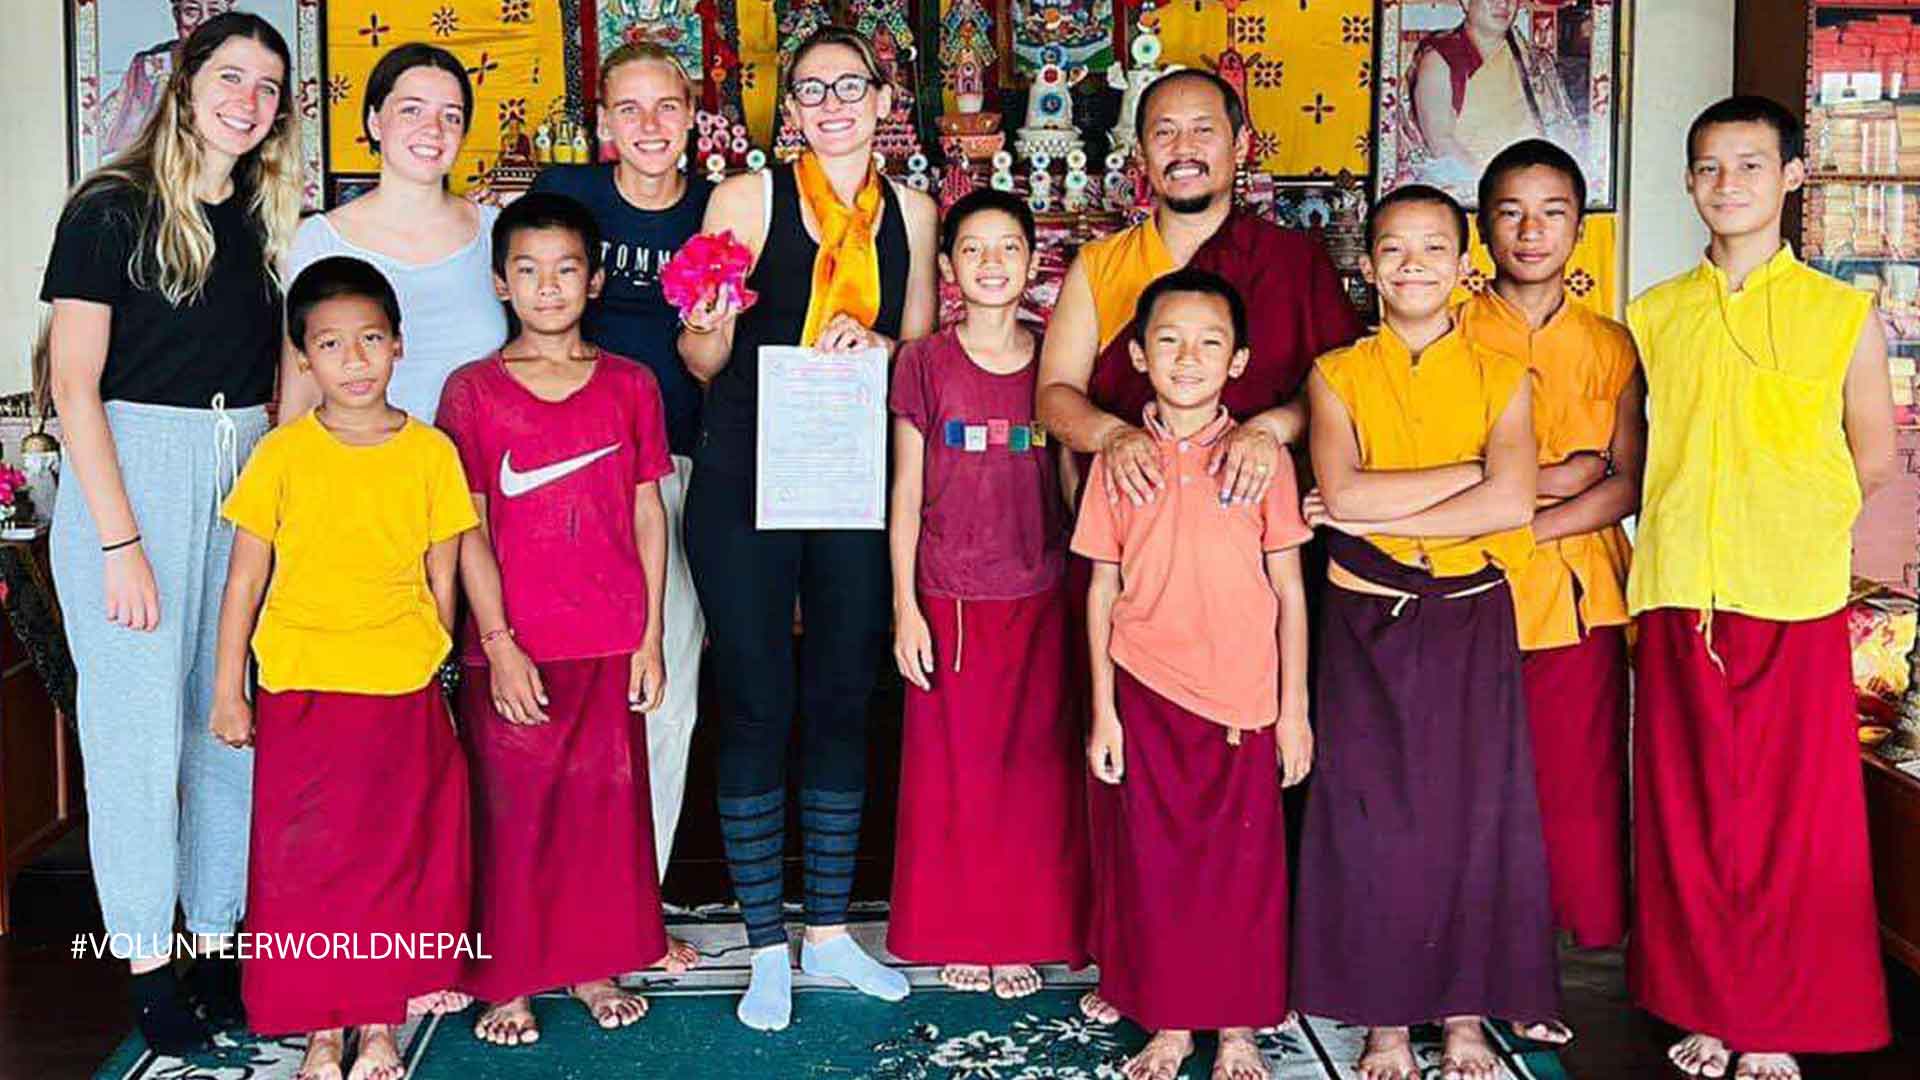 teaching experience in a monastery